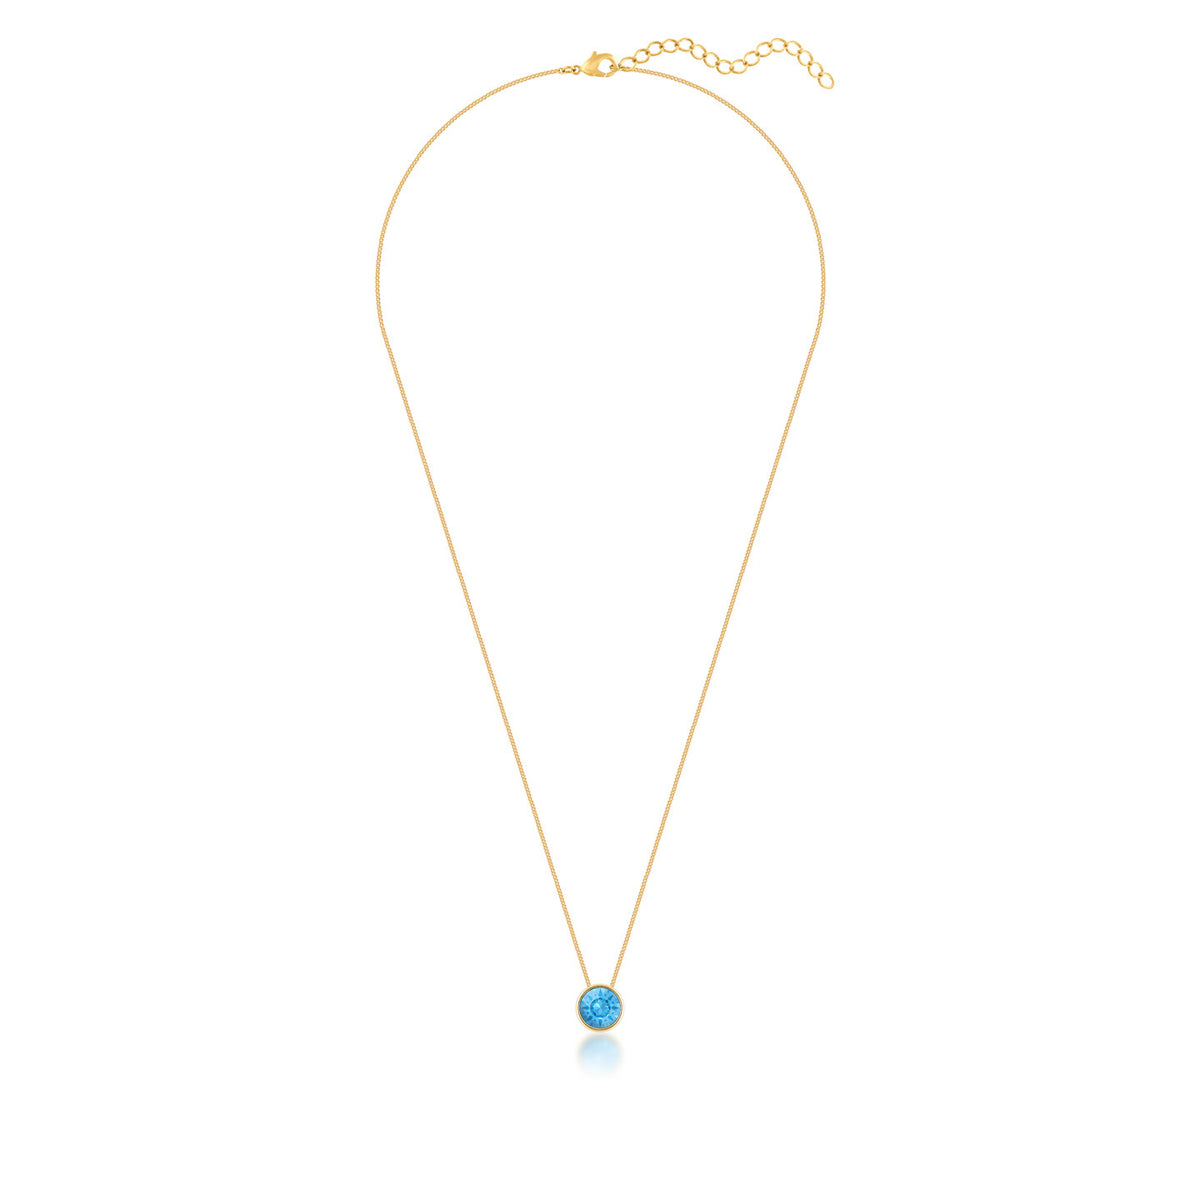 Harley Small Pendant Necklace with Blue Aquamarine Round Crystals from Swarovski Gold Plated - Ed Heart